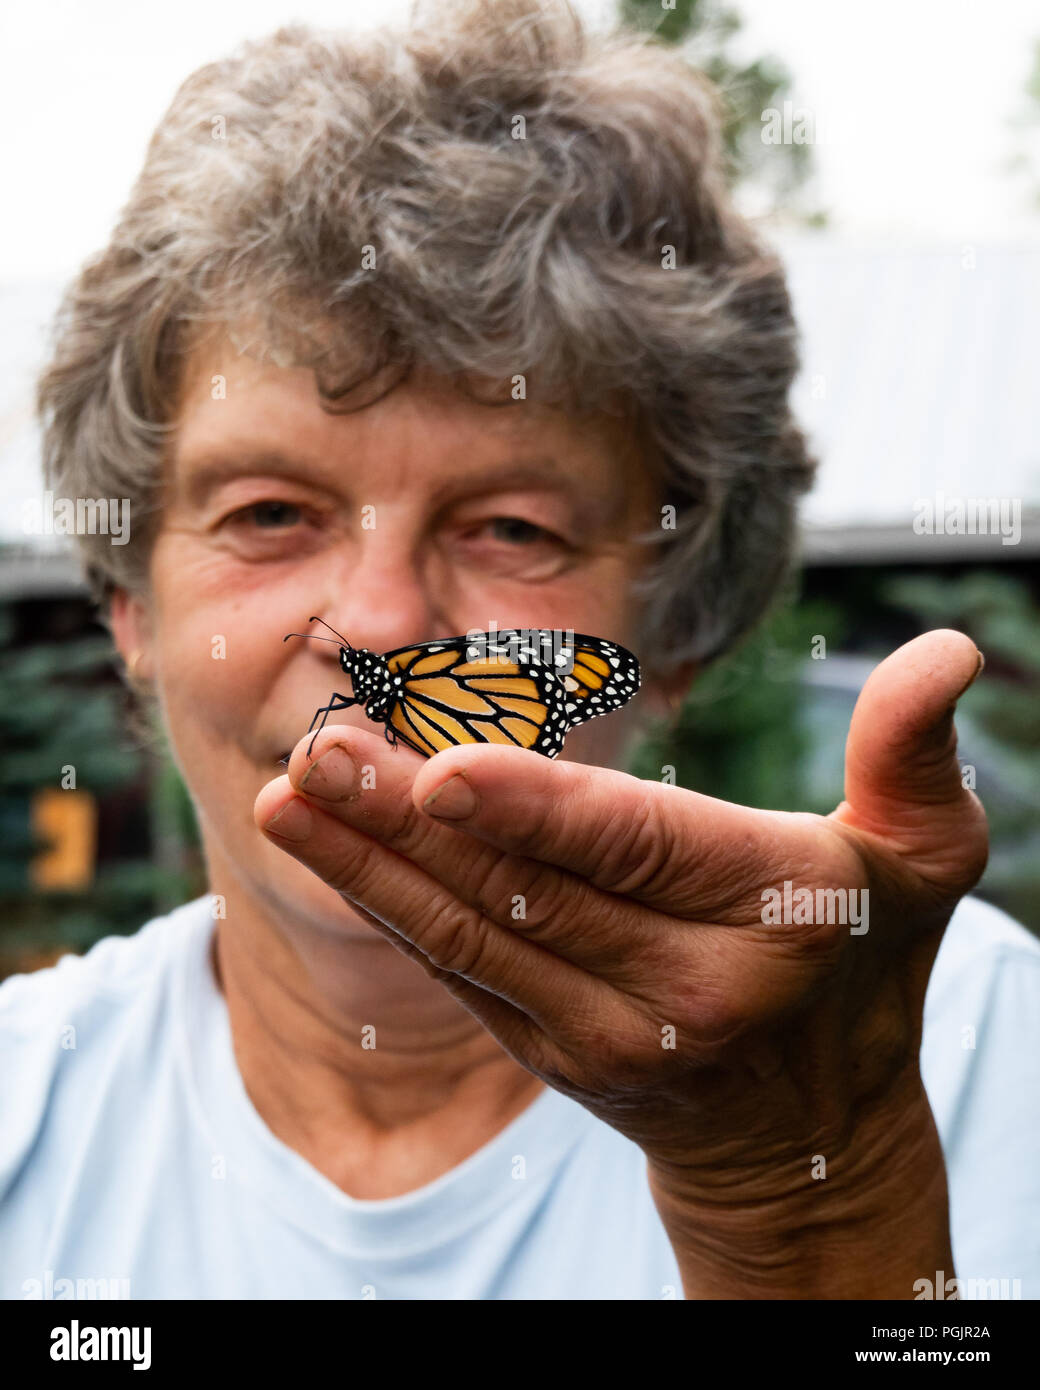 A senior female admiring a freshly emerged monarch butterfly, danaus plexippus, sitting on her hand in a garden in Speculator, NY USA Stock Photo